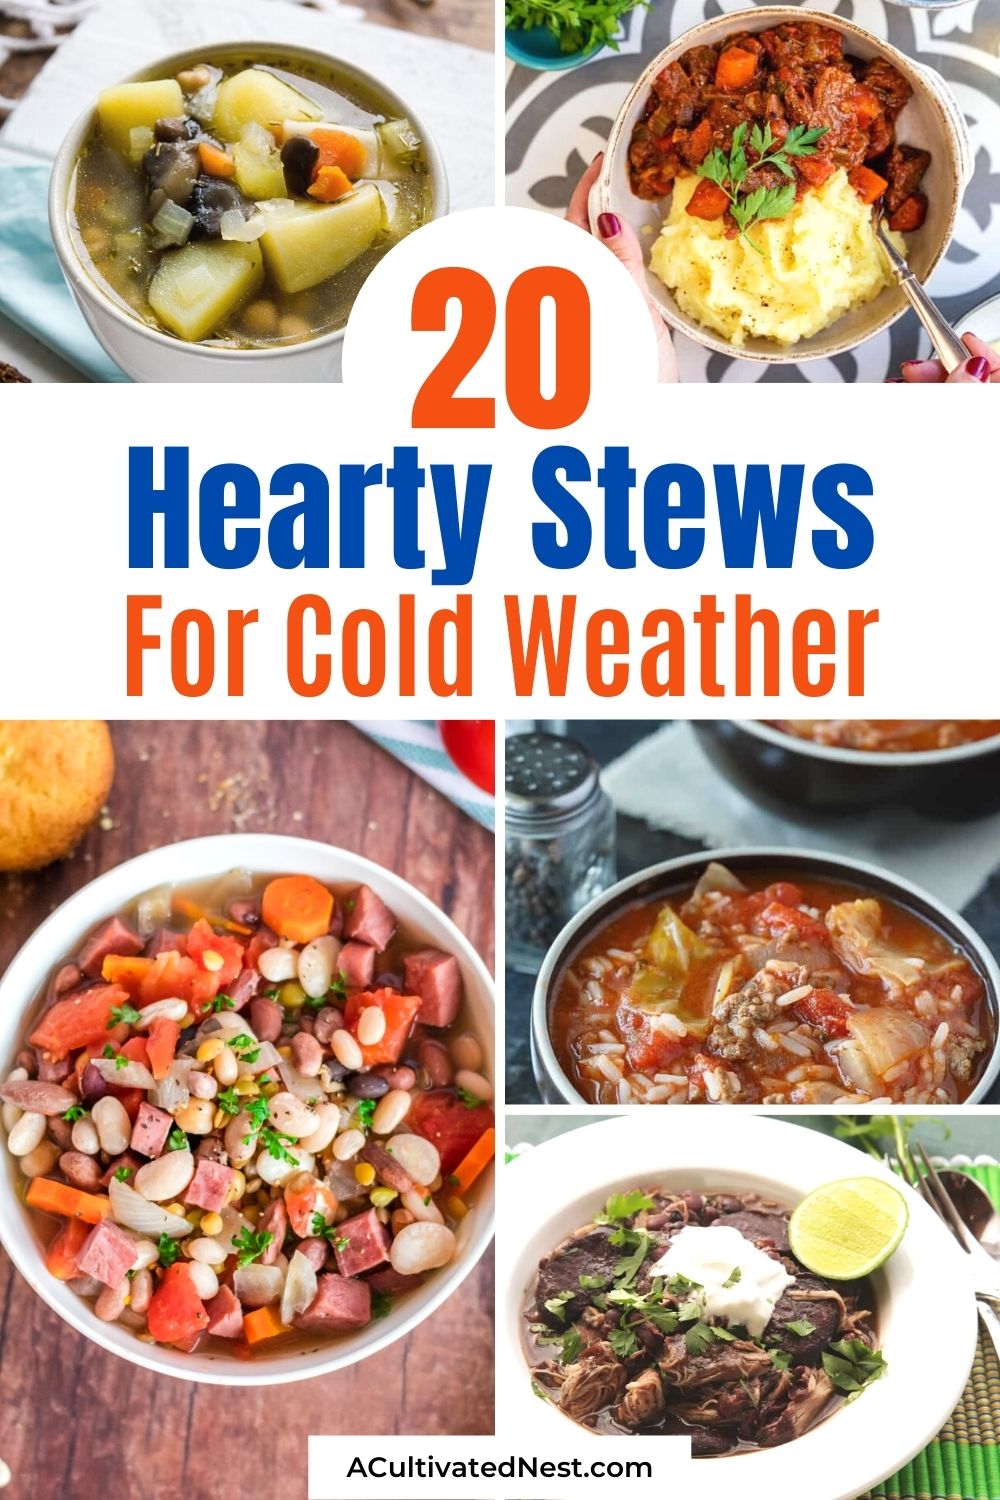 20 Hearty Stews for Cold Weather